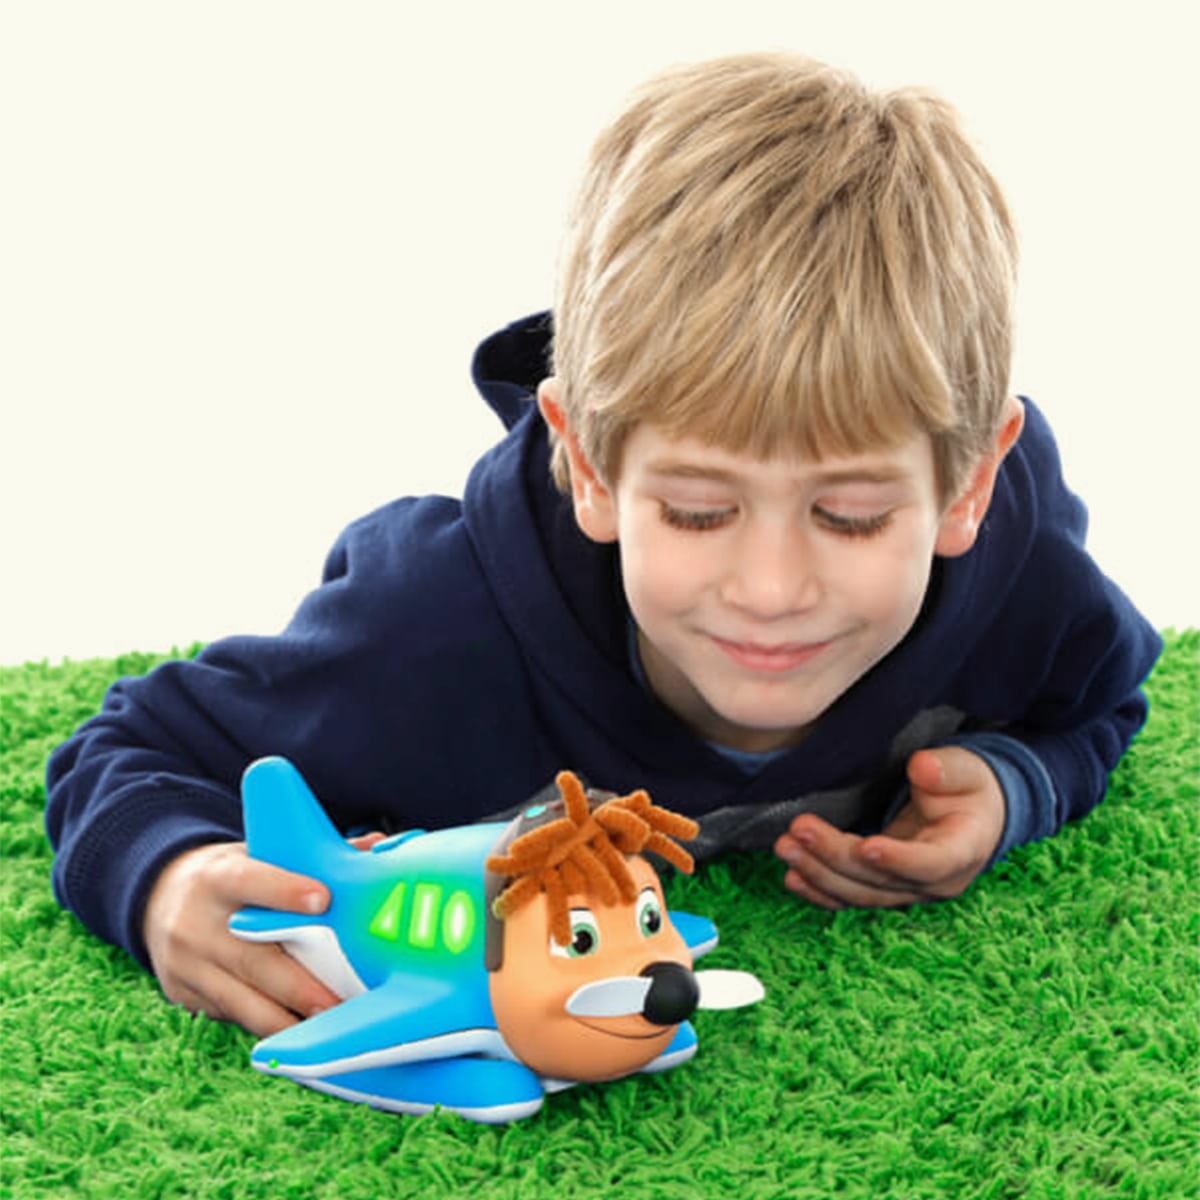 Preschool Educational Learning Airplane Toy for Kids